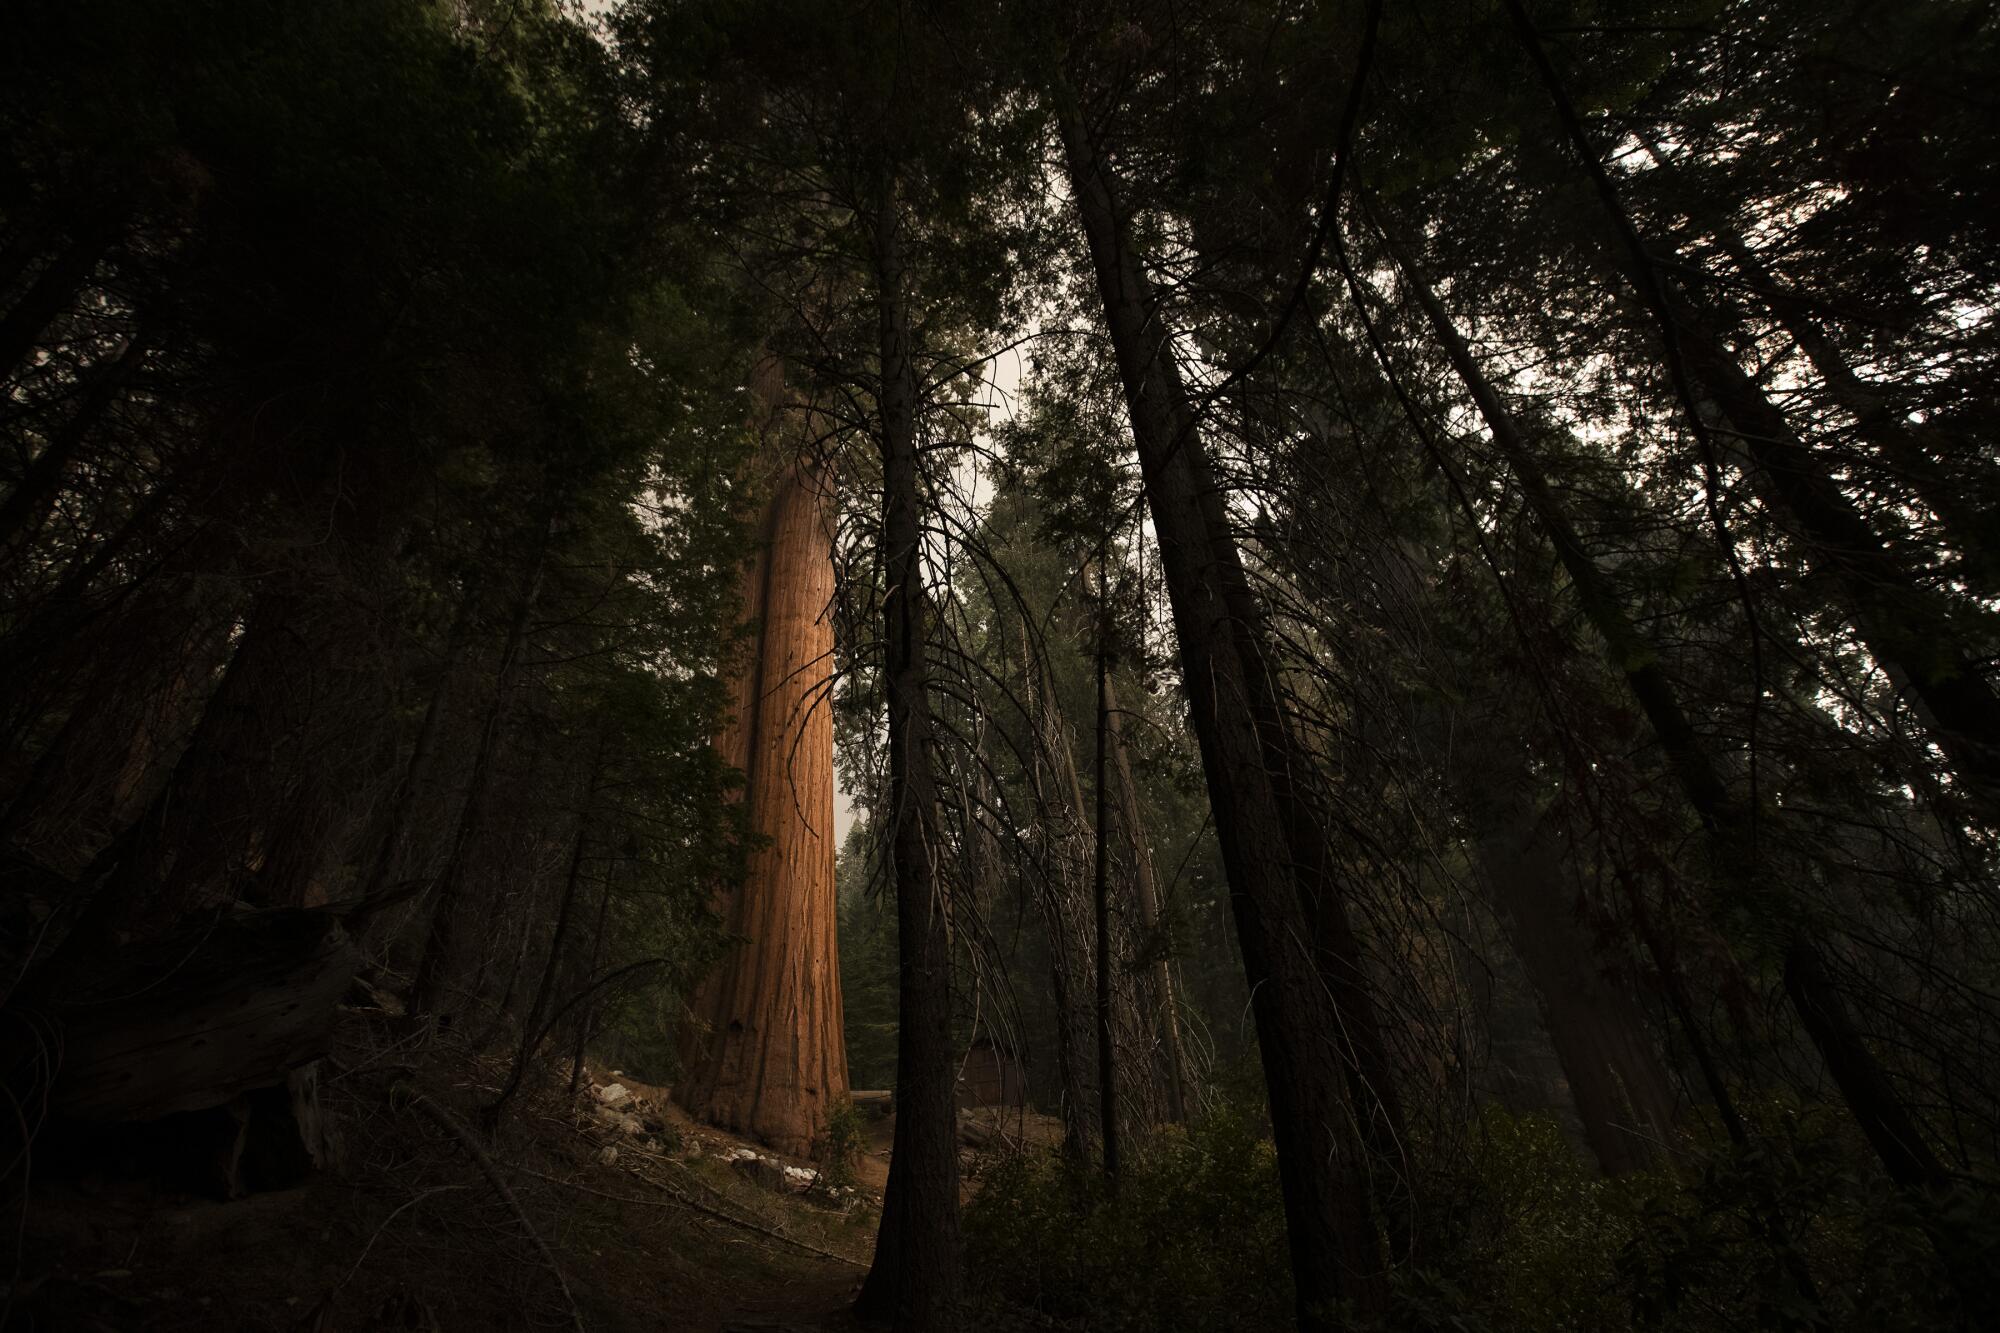 A grove of giant sequoias